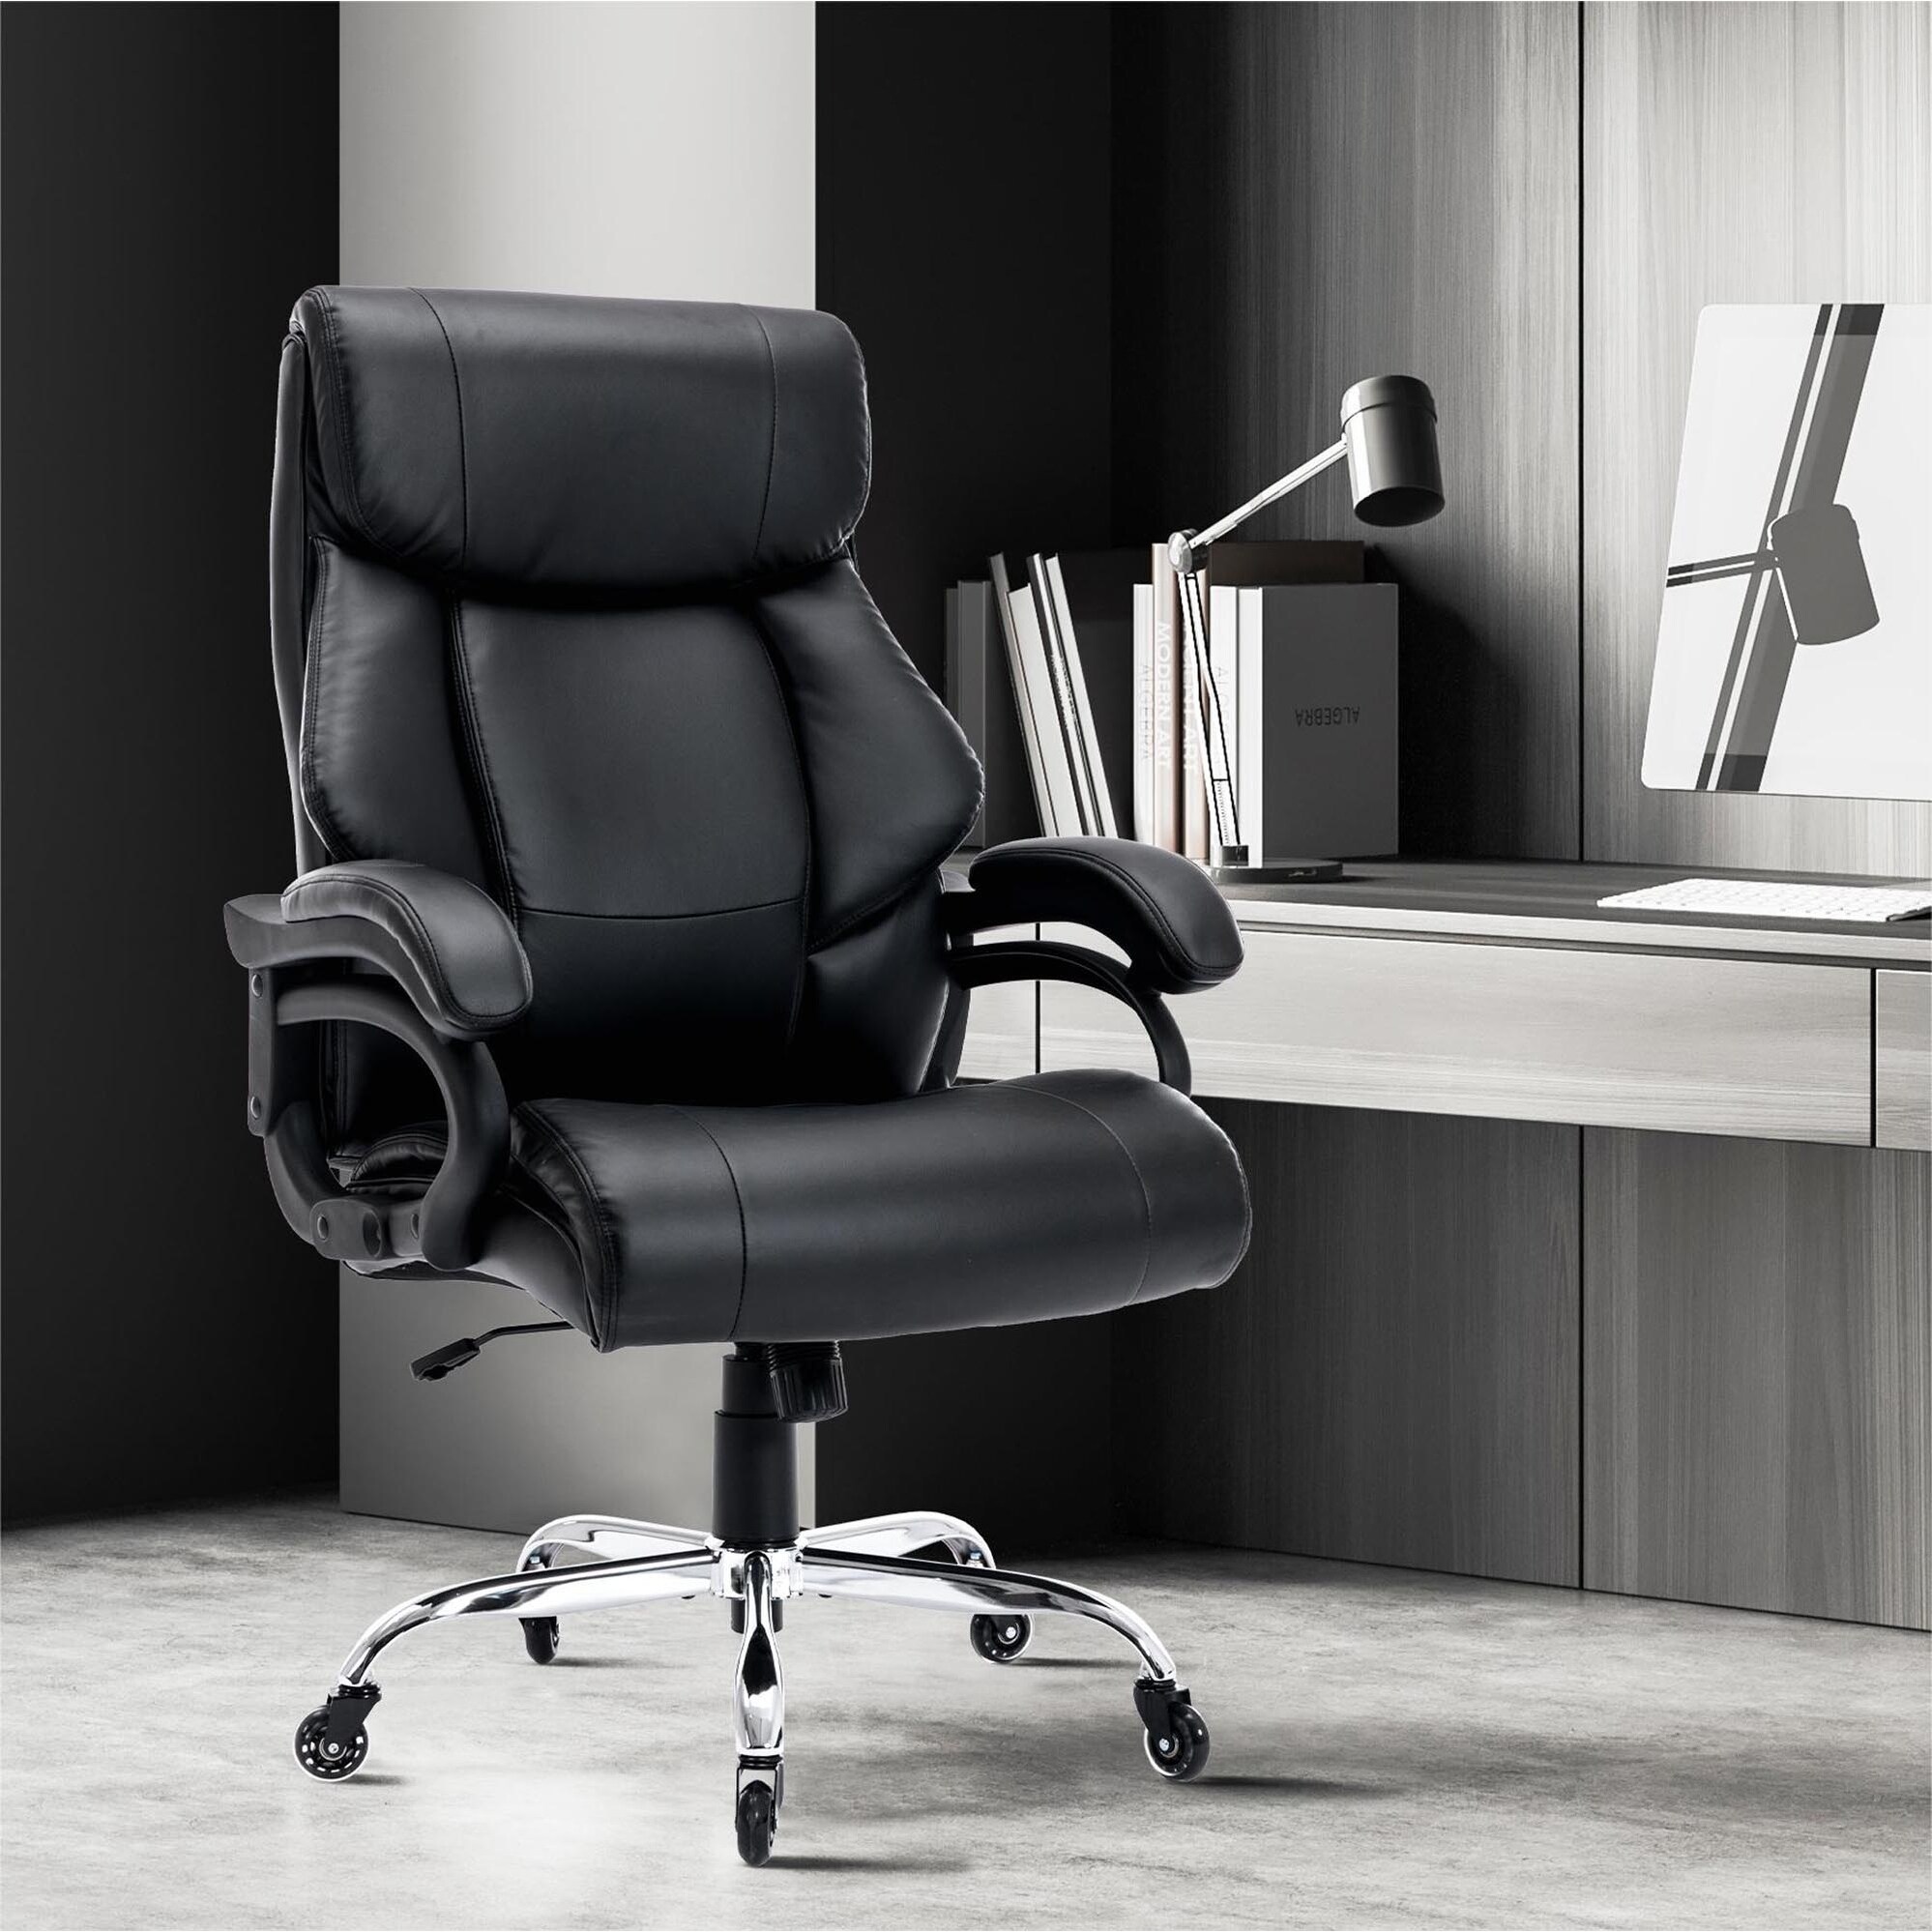 Best jude office chair - leather desk chair - multiwood